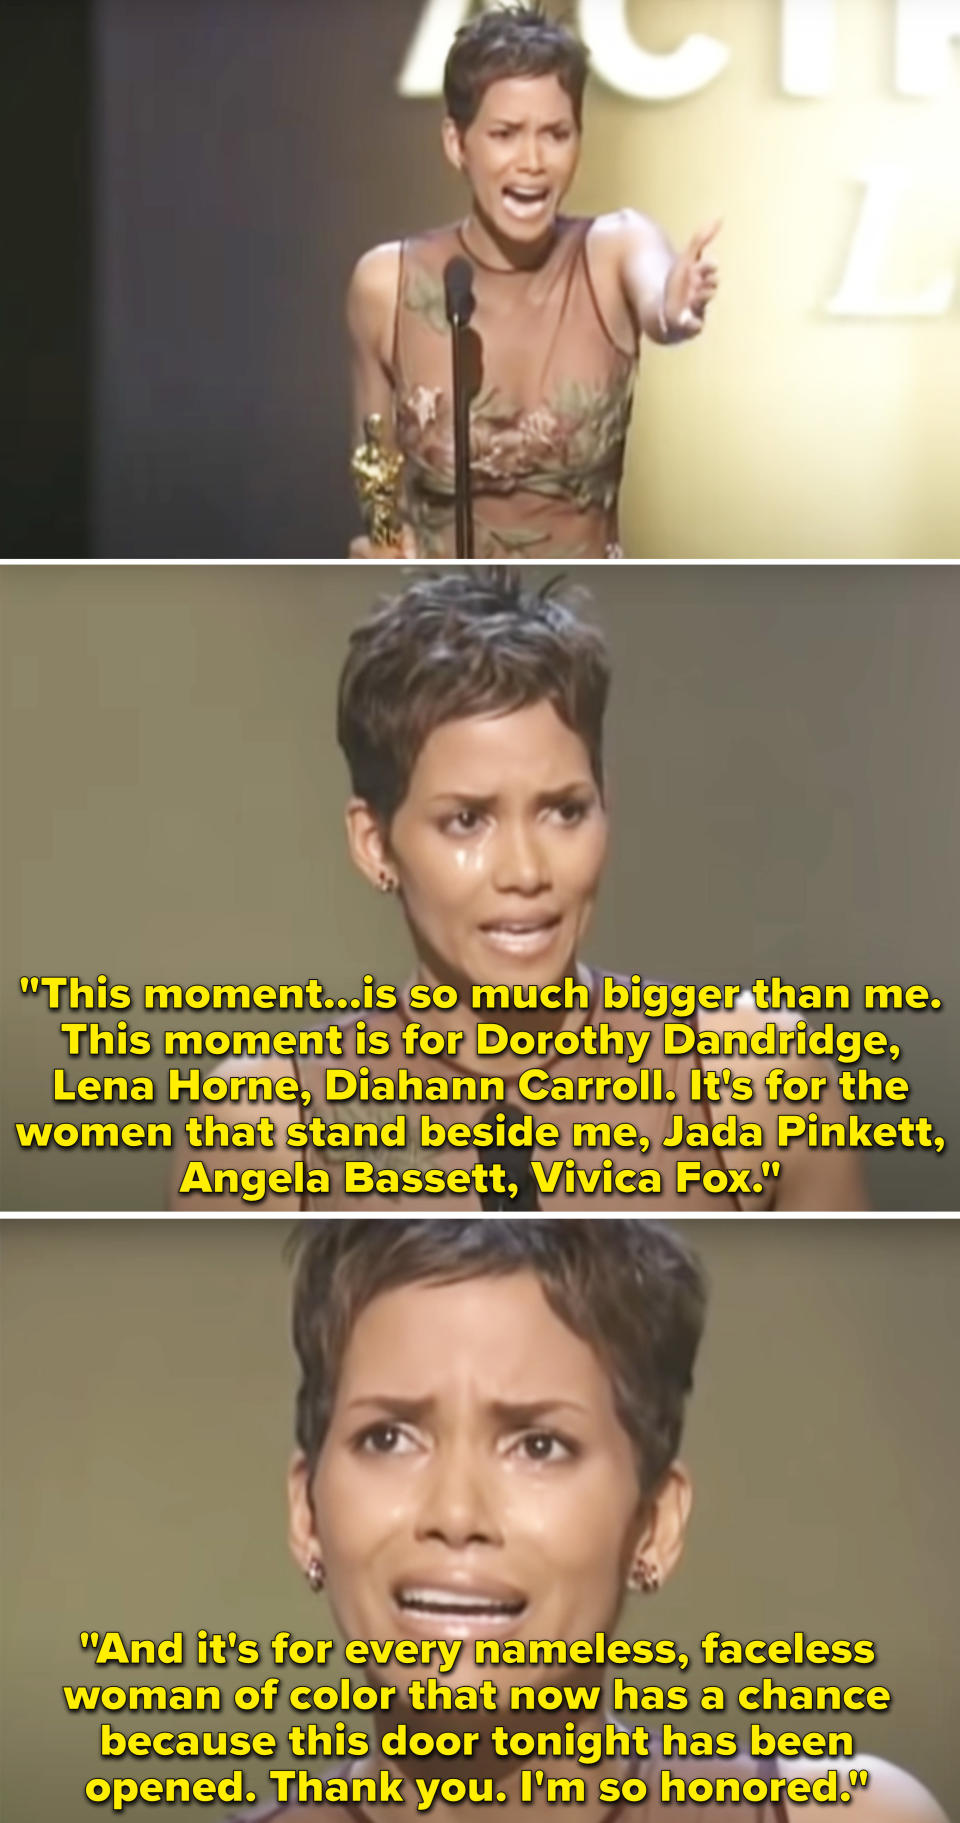 Halle accepting her award and thanking all of the Black actresses that came before her and all of the "nameless, faceless woman of color" who now have a chance